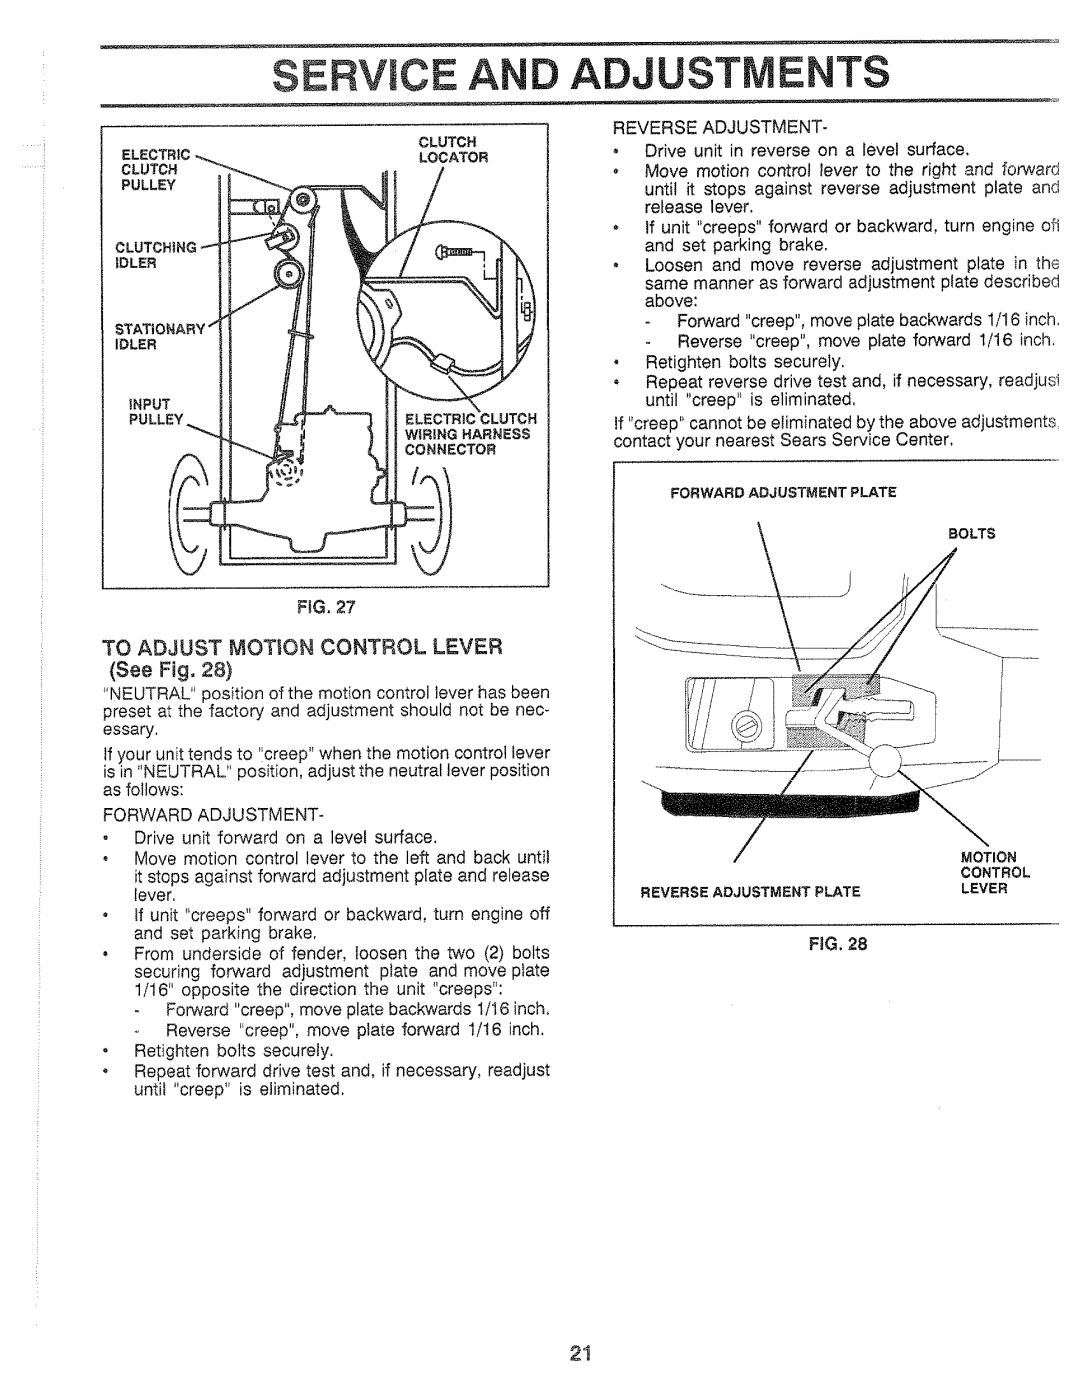 Sears 917.25559 manual Service An Adjustments, See Fig, To Adjust Motion Control Lever, Connector, FiG 